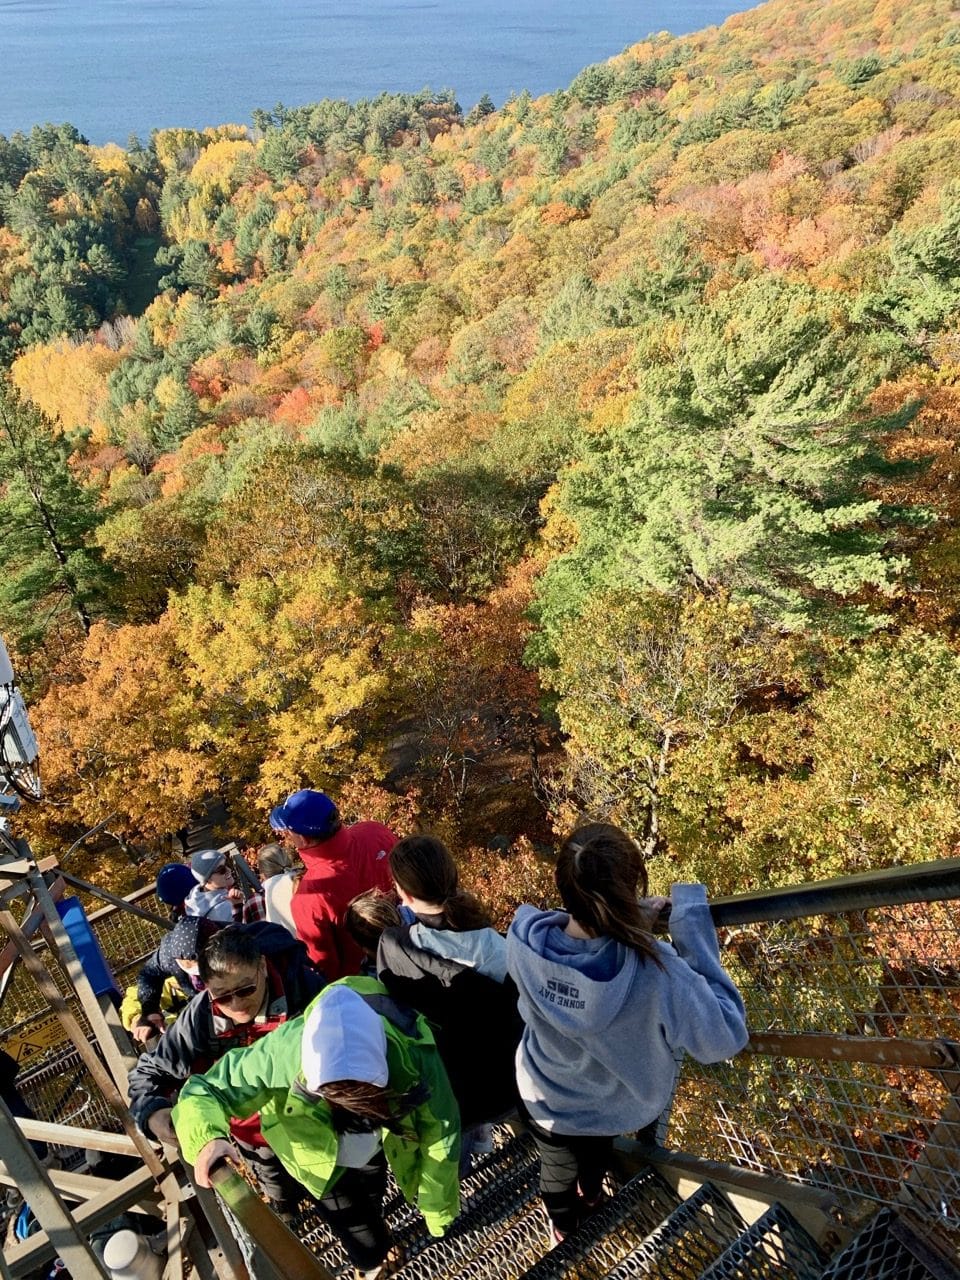 Expect long lines at the Dorset Lookout Tower in the Fall high season.